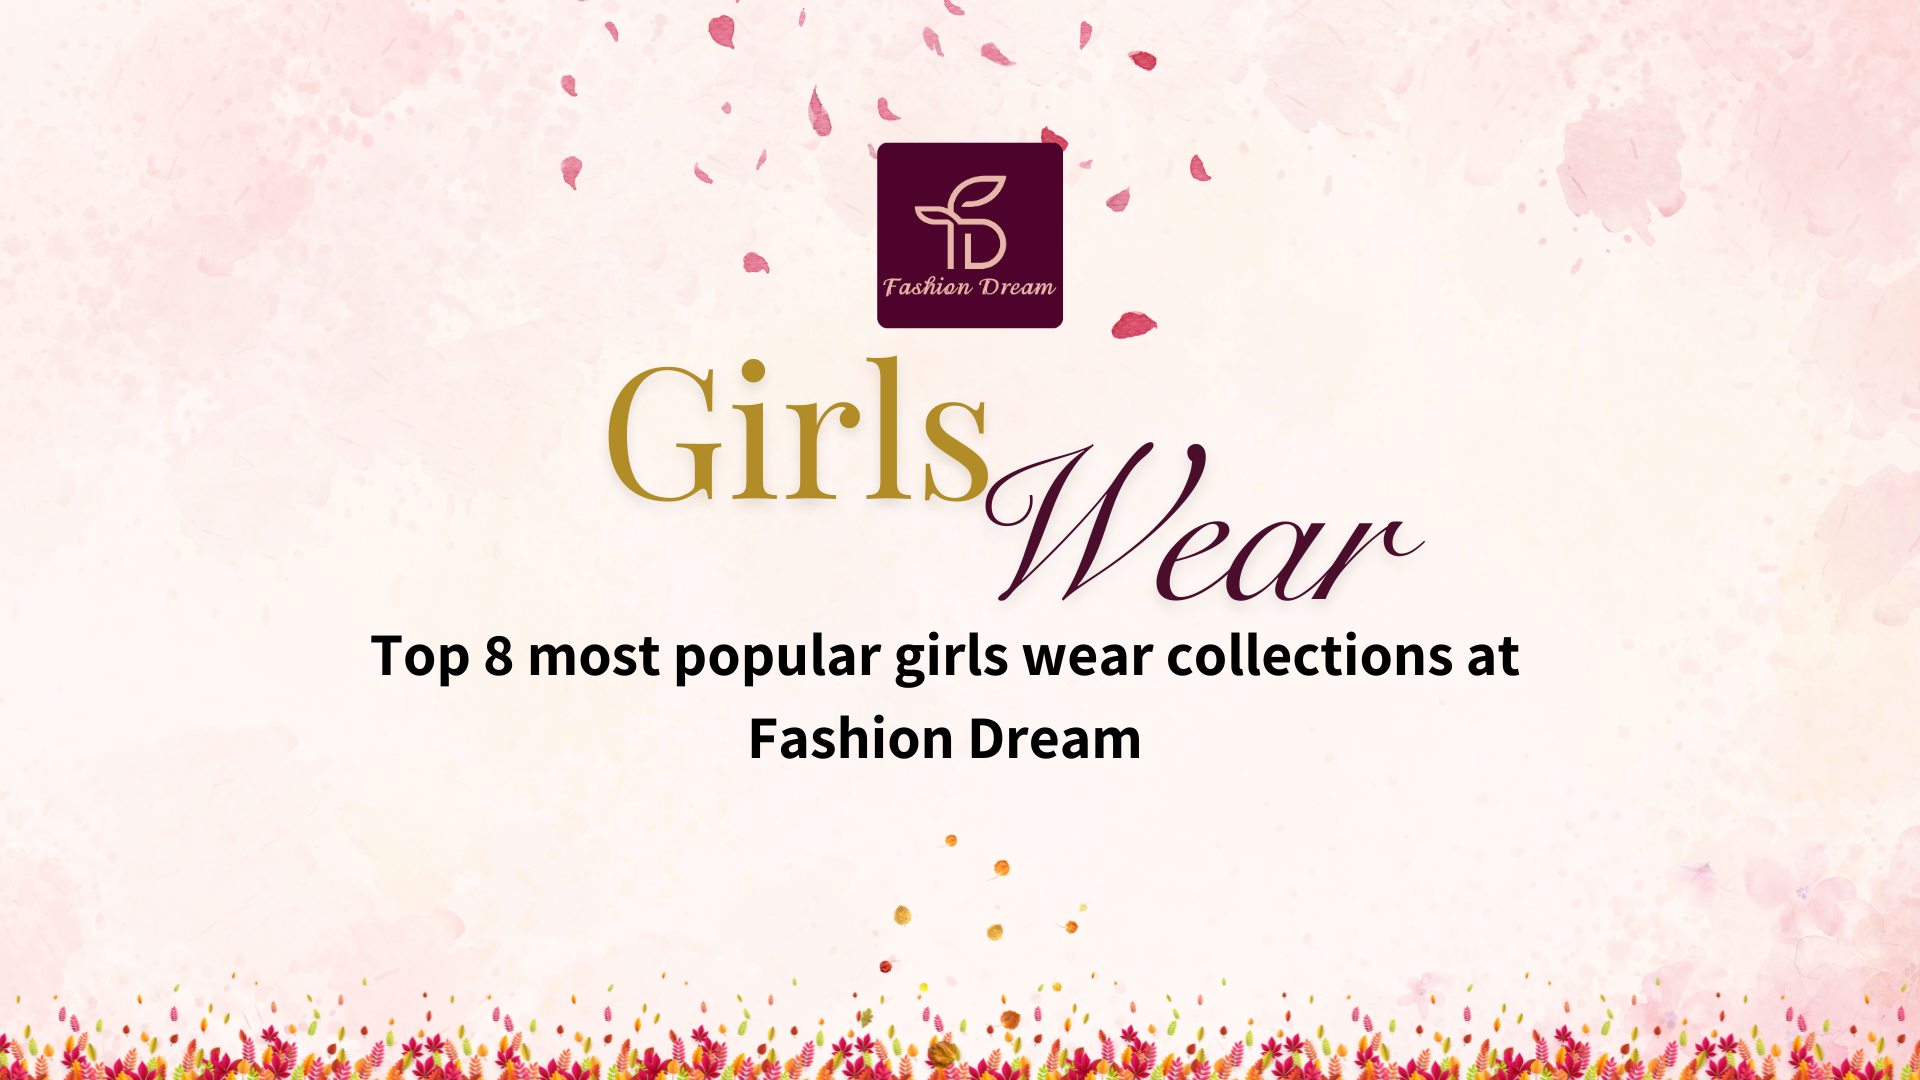 Top 8 most popular girls wear collections at Fashion Dream